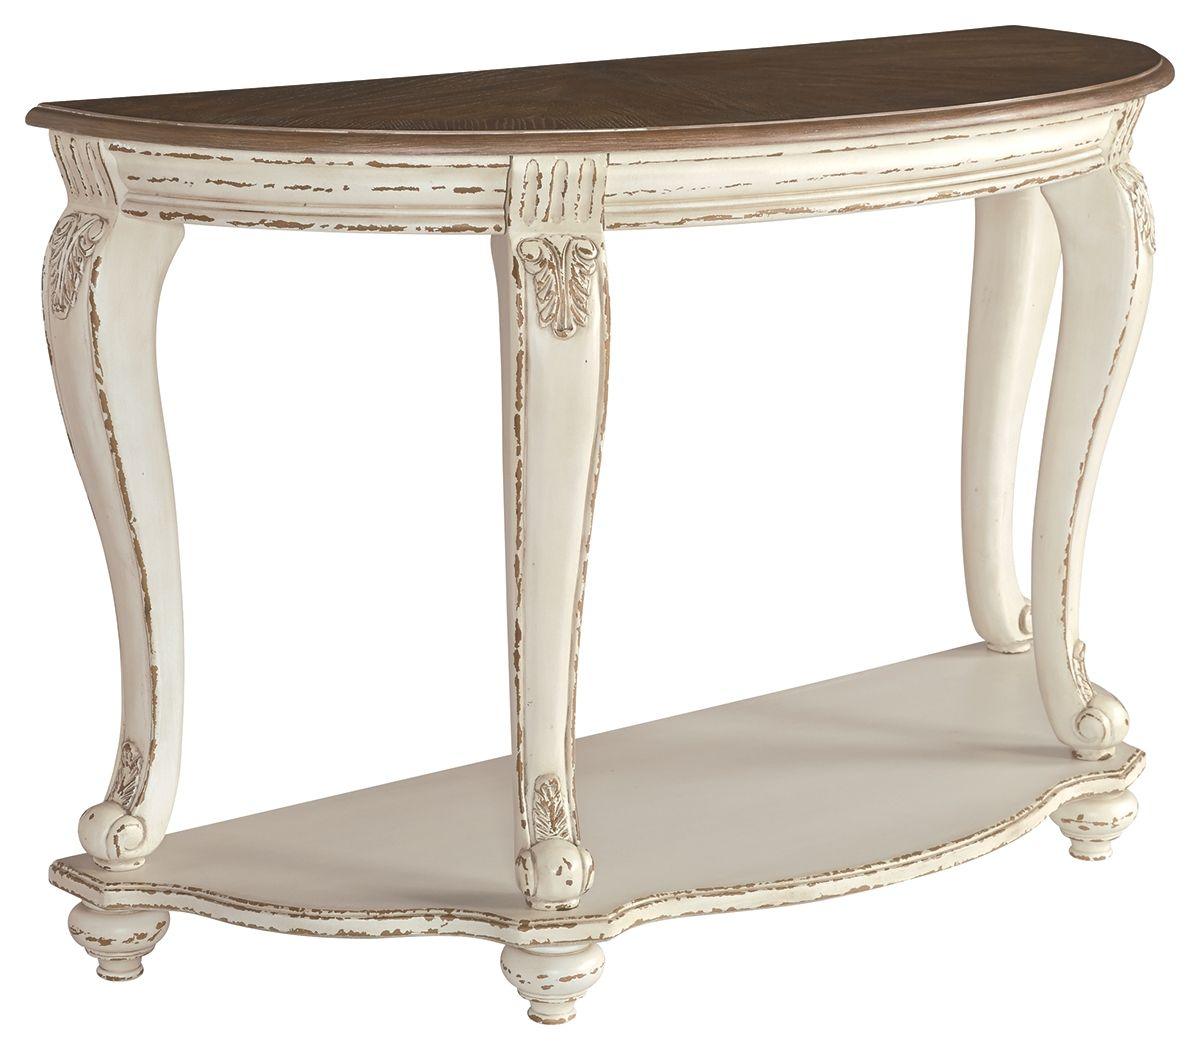 Realyn - White / Brown - Sofa Table Tony's Home Furnishings Furniture. Beds. Dressers. Sofas.